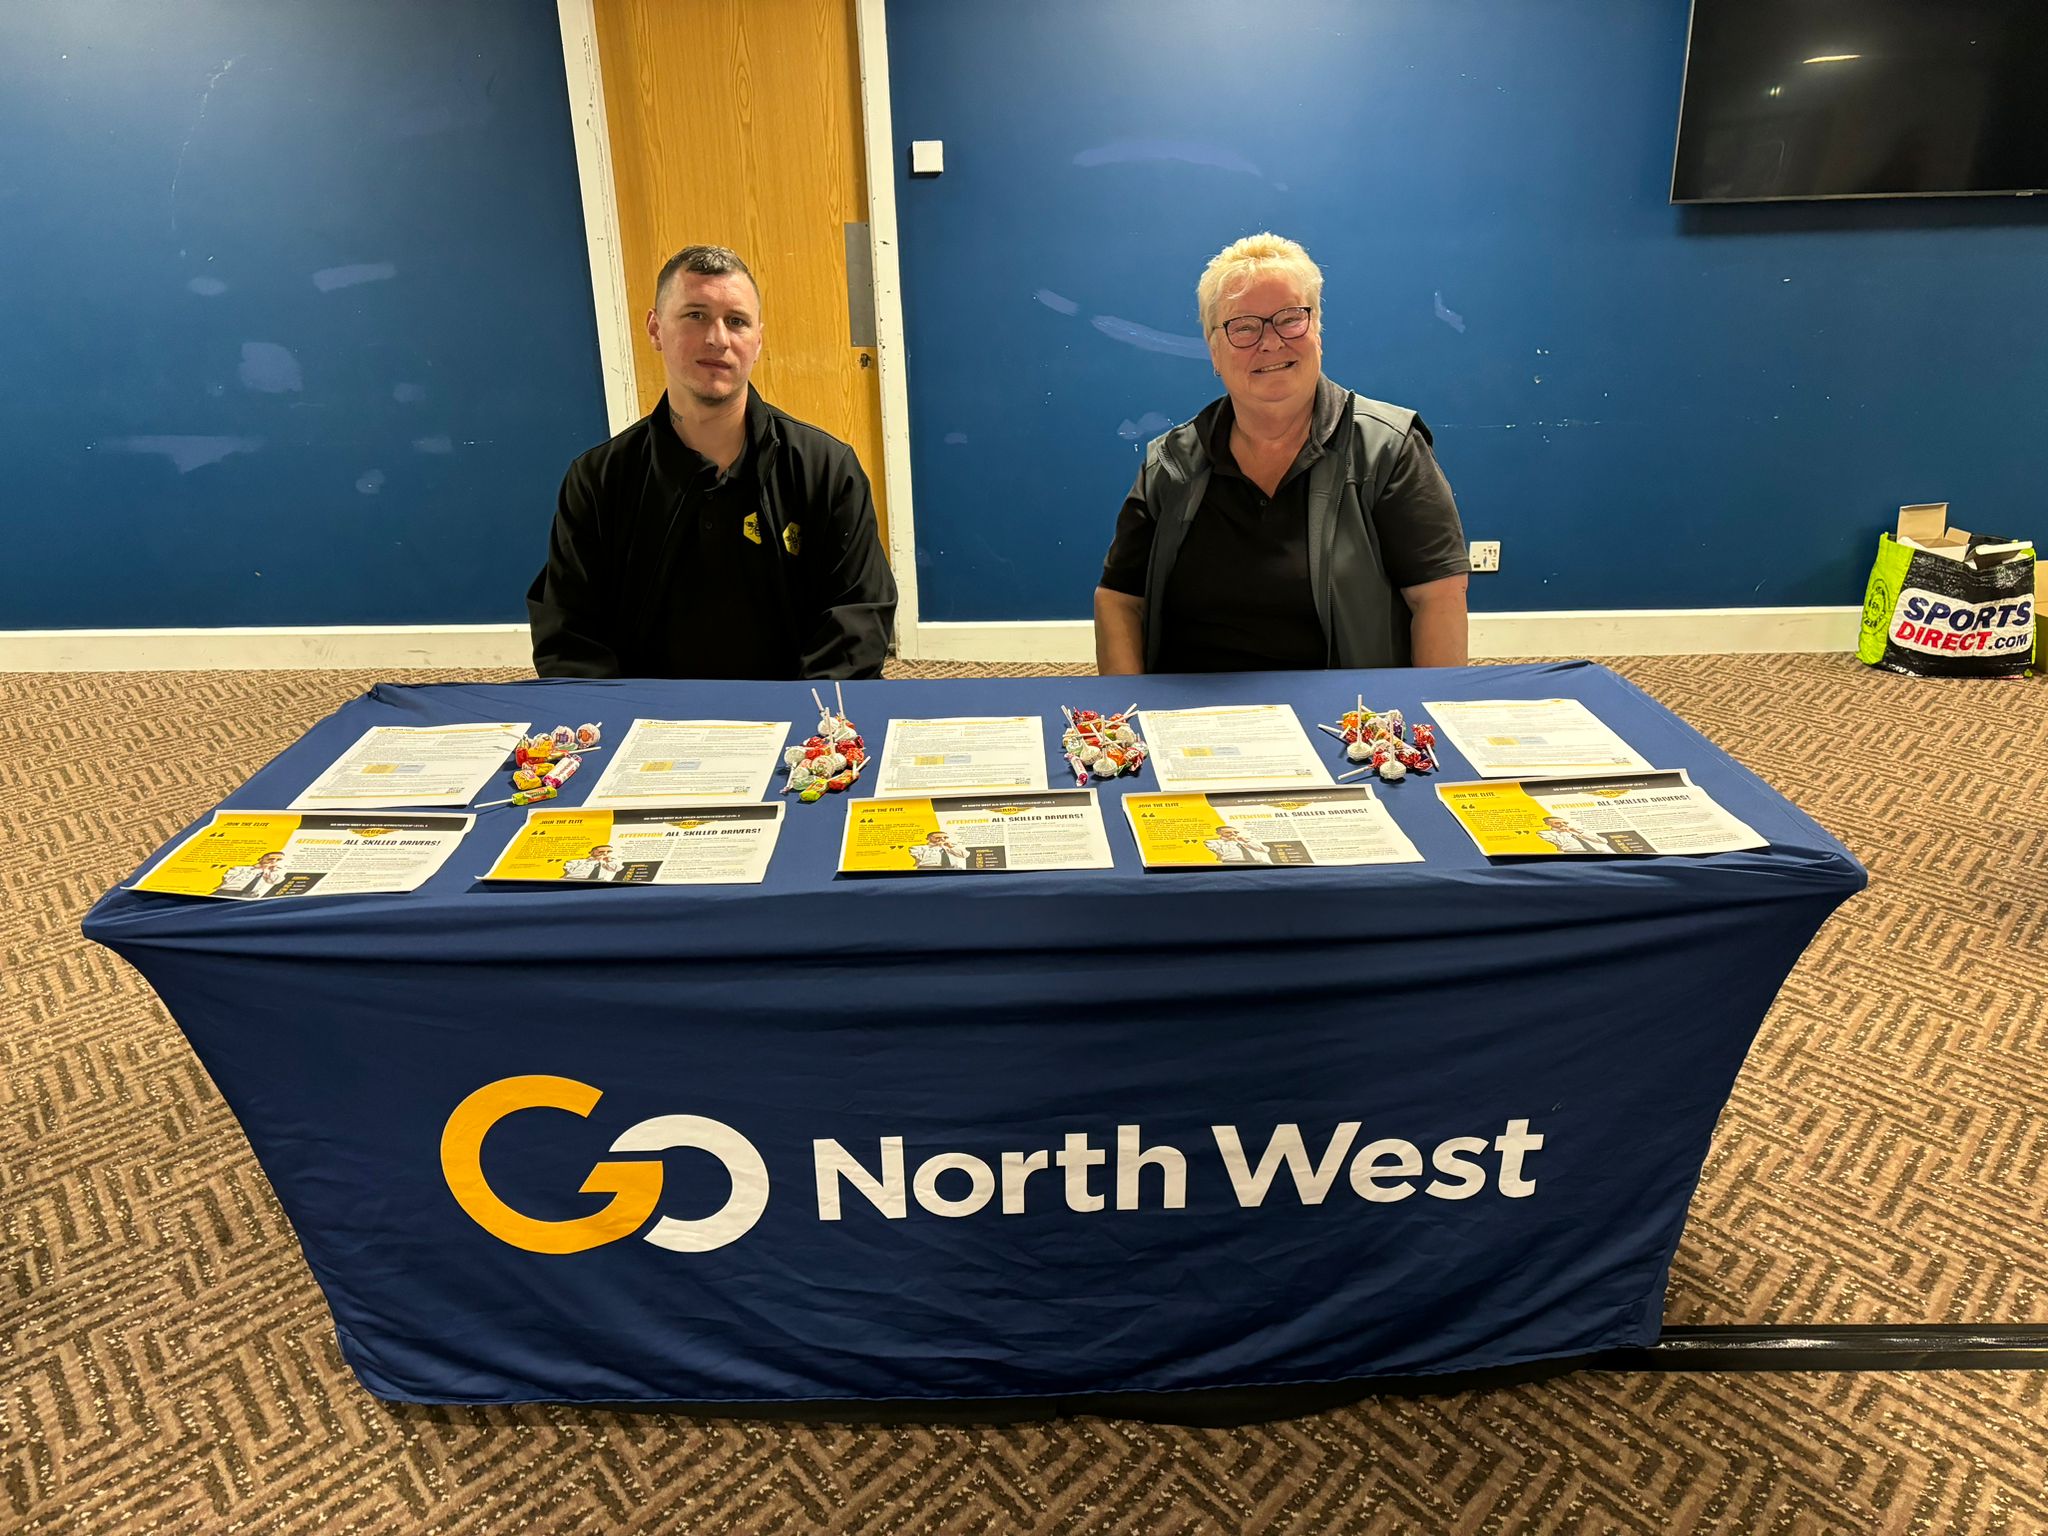 Go North West at our event in Wigan